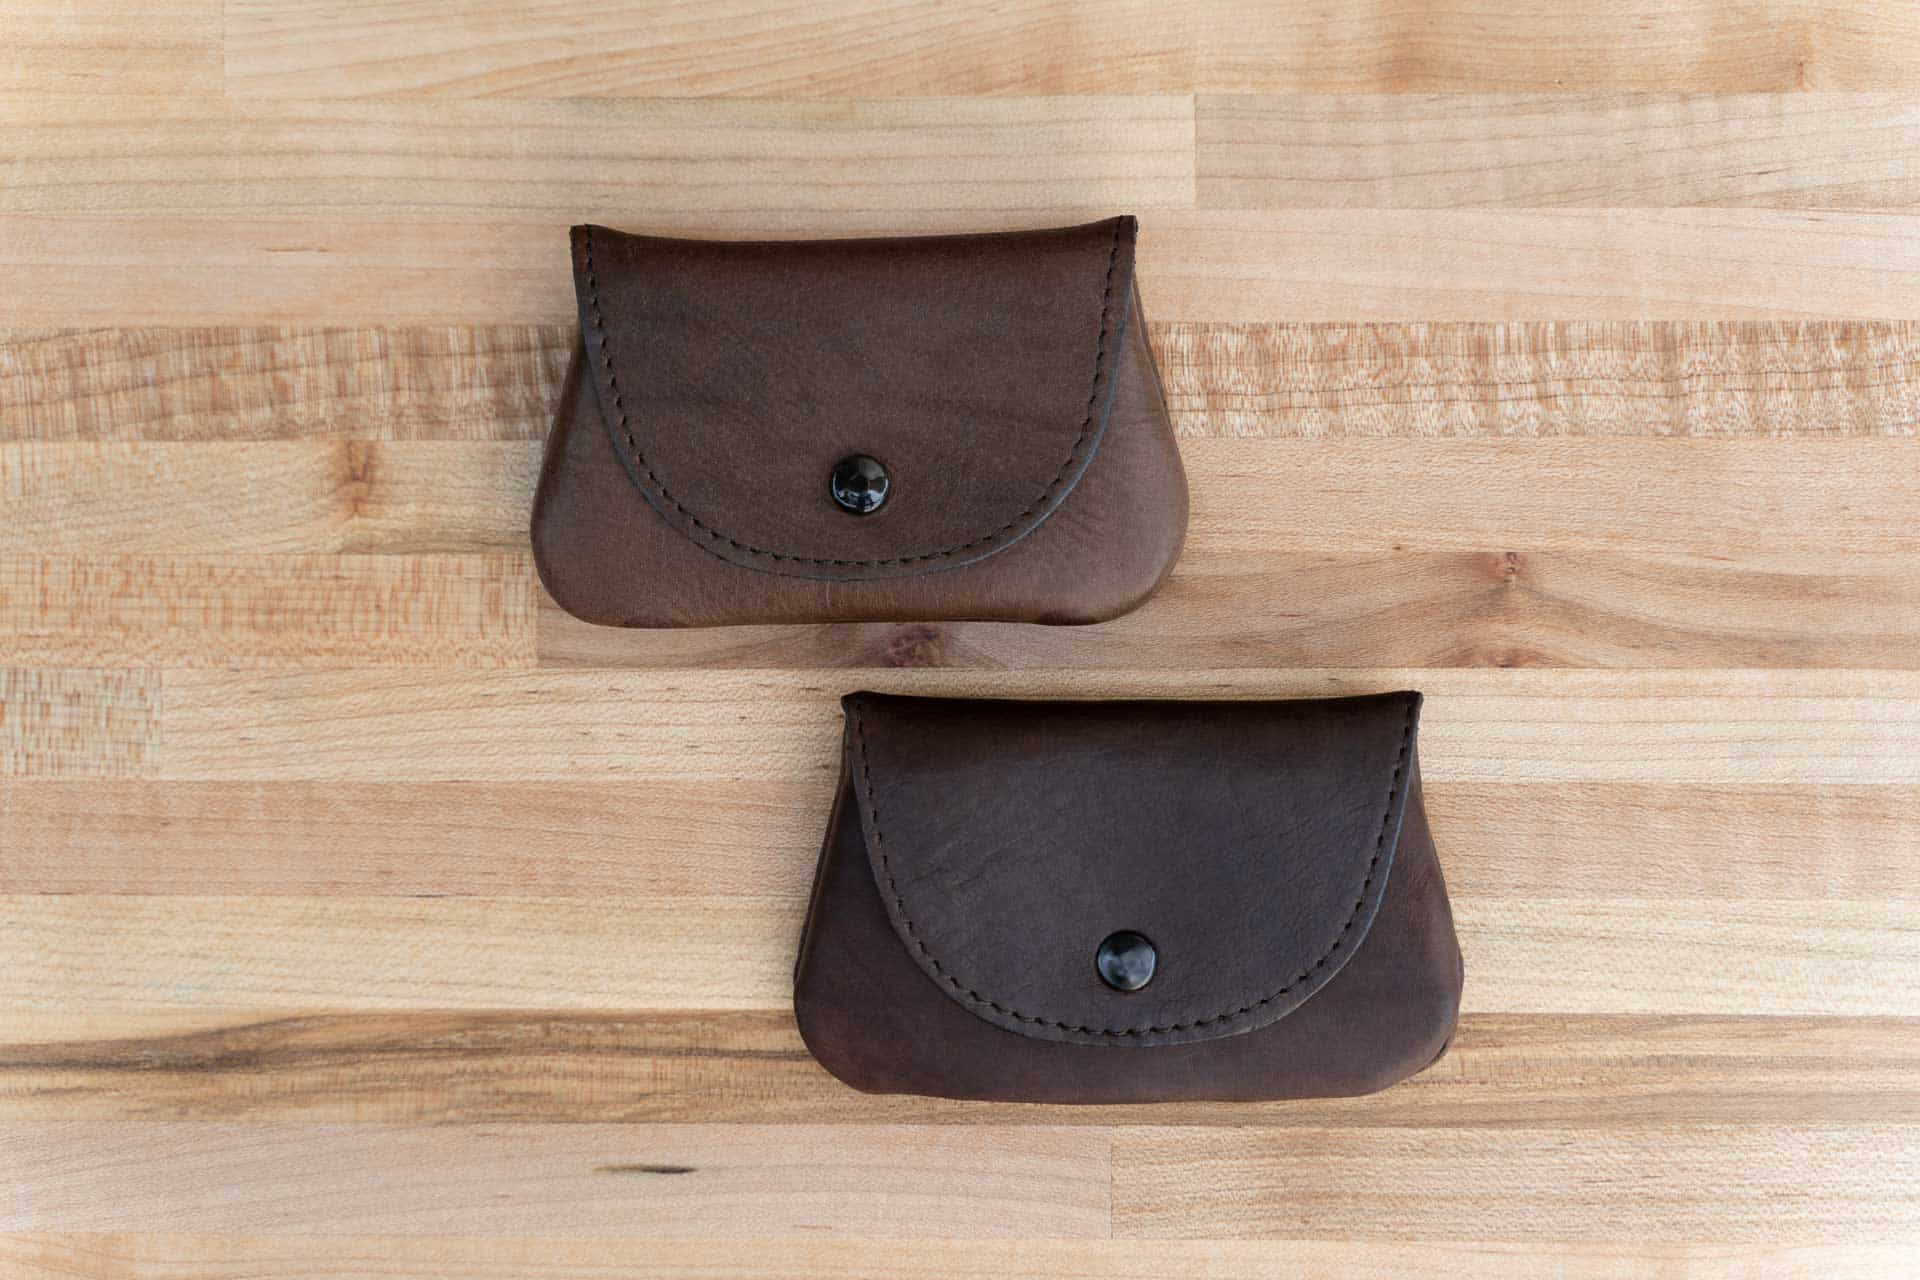 Mens Leather Coin Purse with Snap - Made in USA | Buffalo Billfold Co